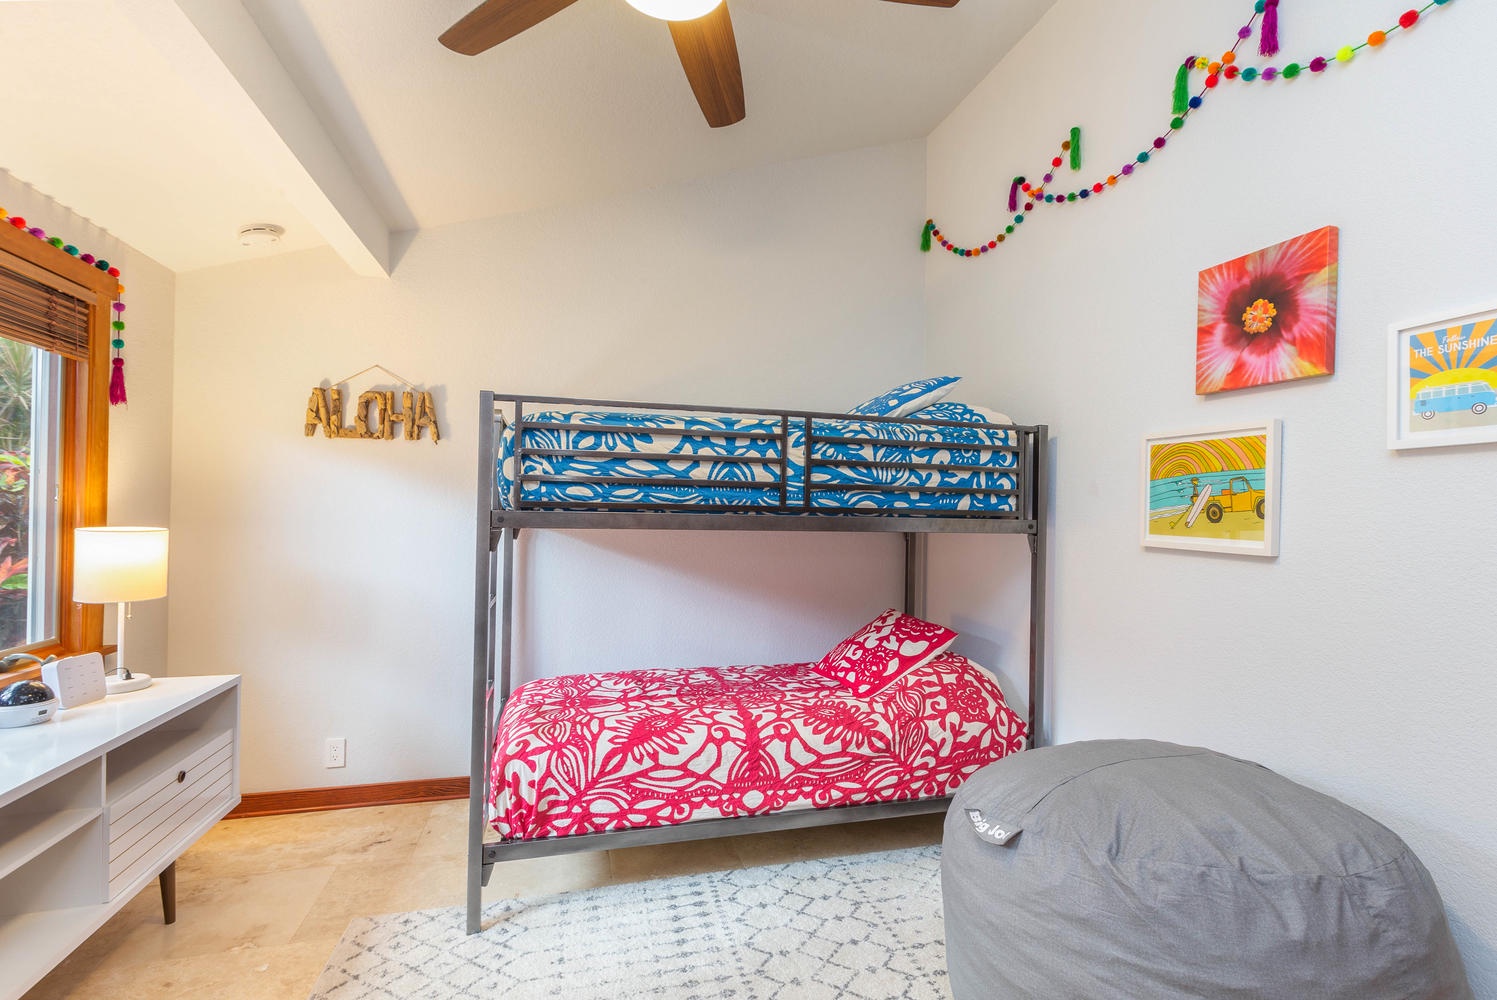 Princeville Vacation Rentals, Makana Lei - Bunk beds for large families